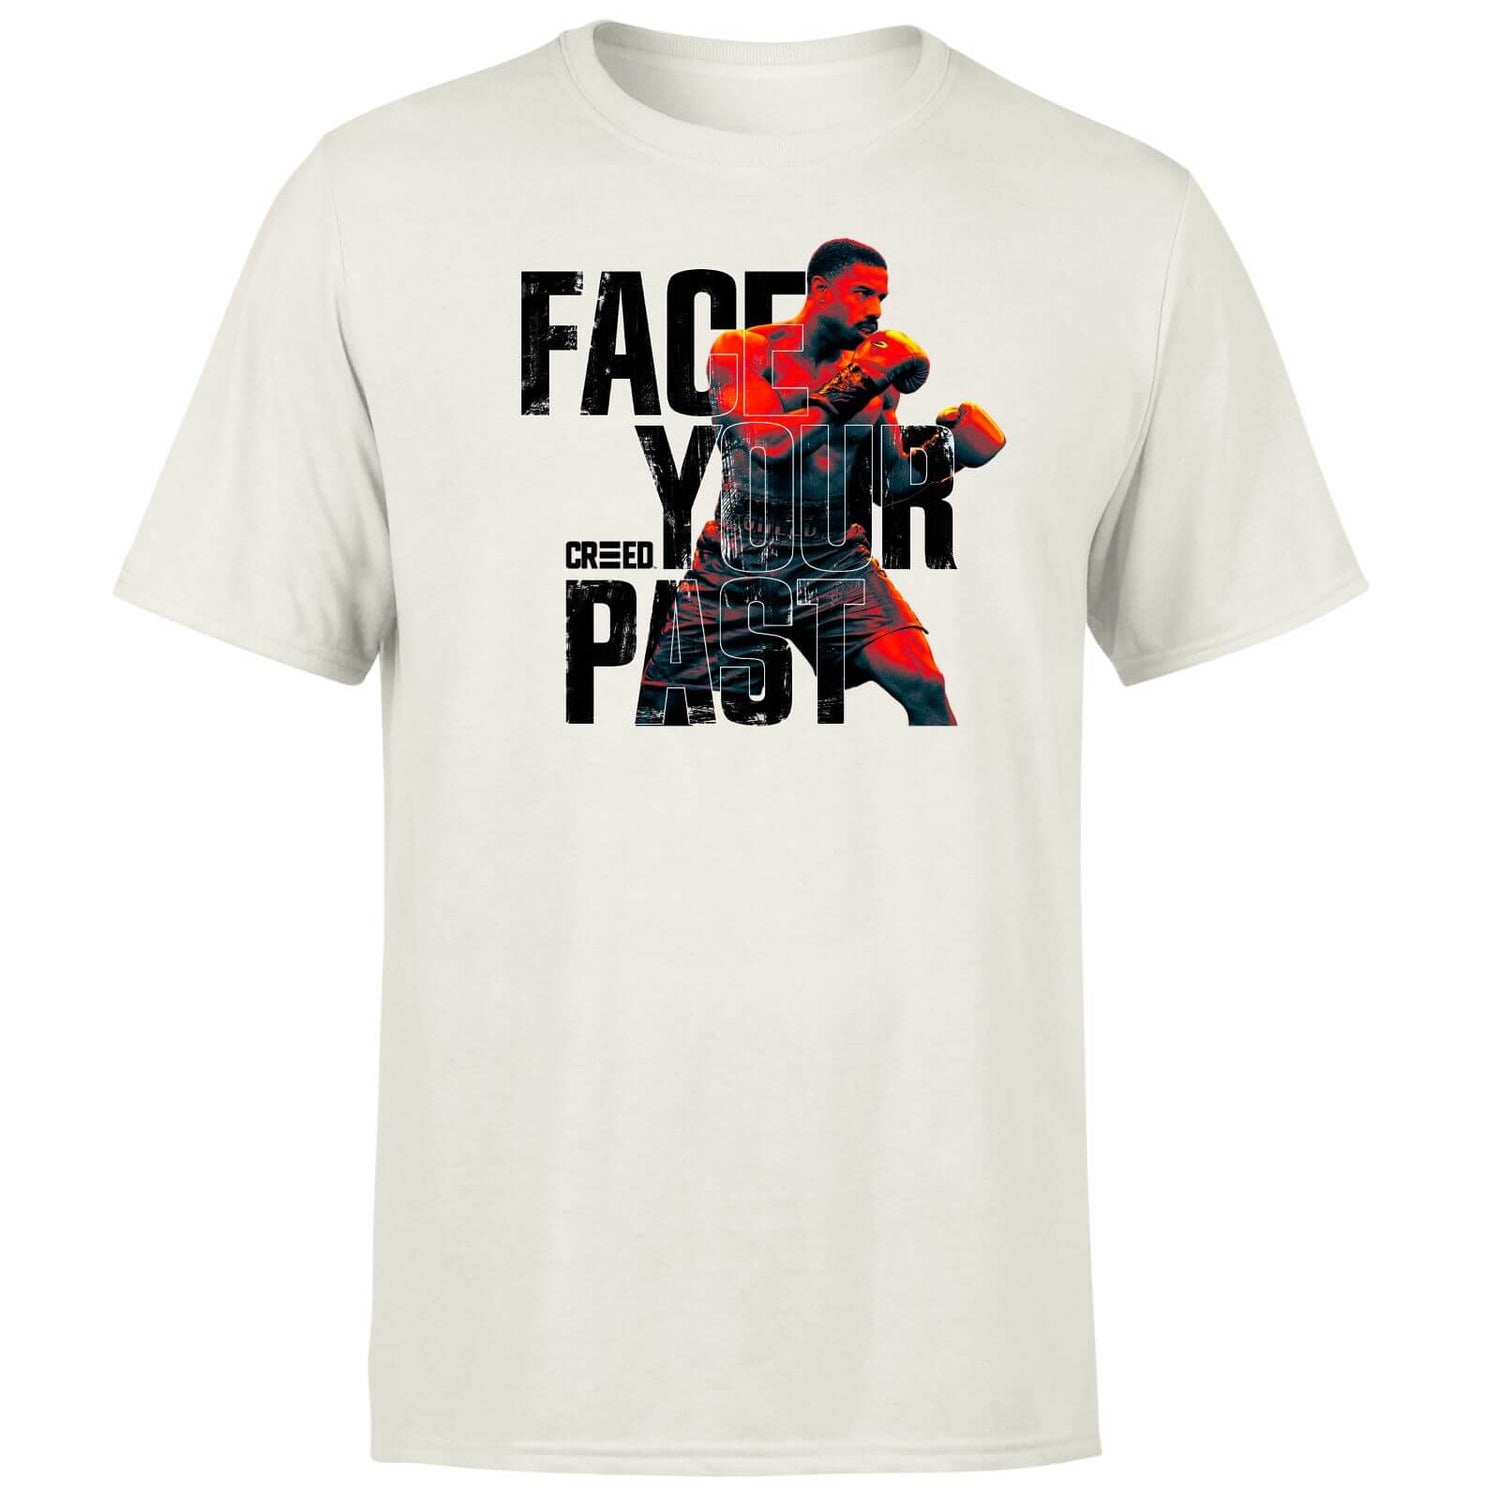 Creed Face Your Past Men's T-Shirt - Cream - XS